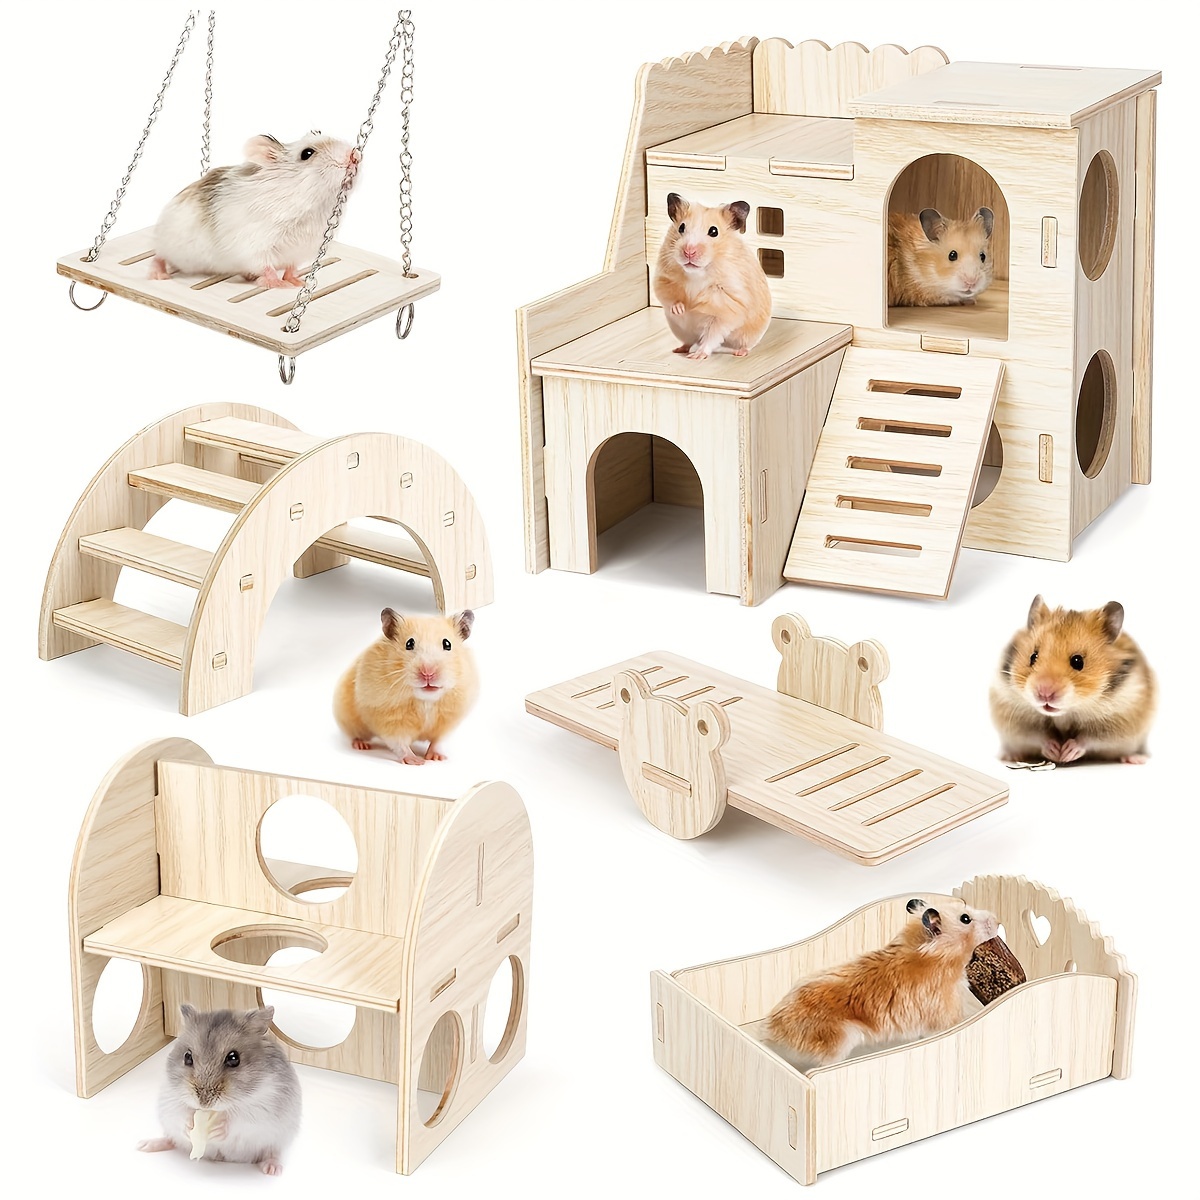 

6pcs Diy Wooden Hamster Toys, Hamster Hideout, House, Hamster, Chew Toy, Hamster Accessories, Race Running Mouse, Hamster